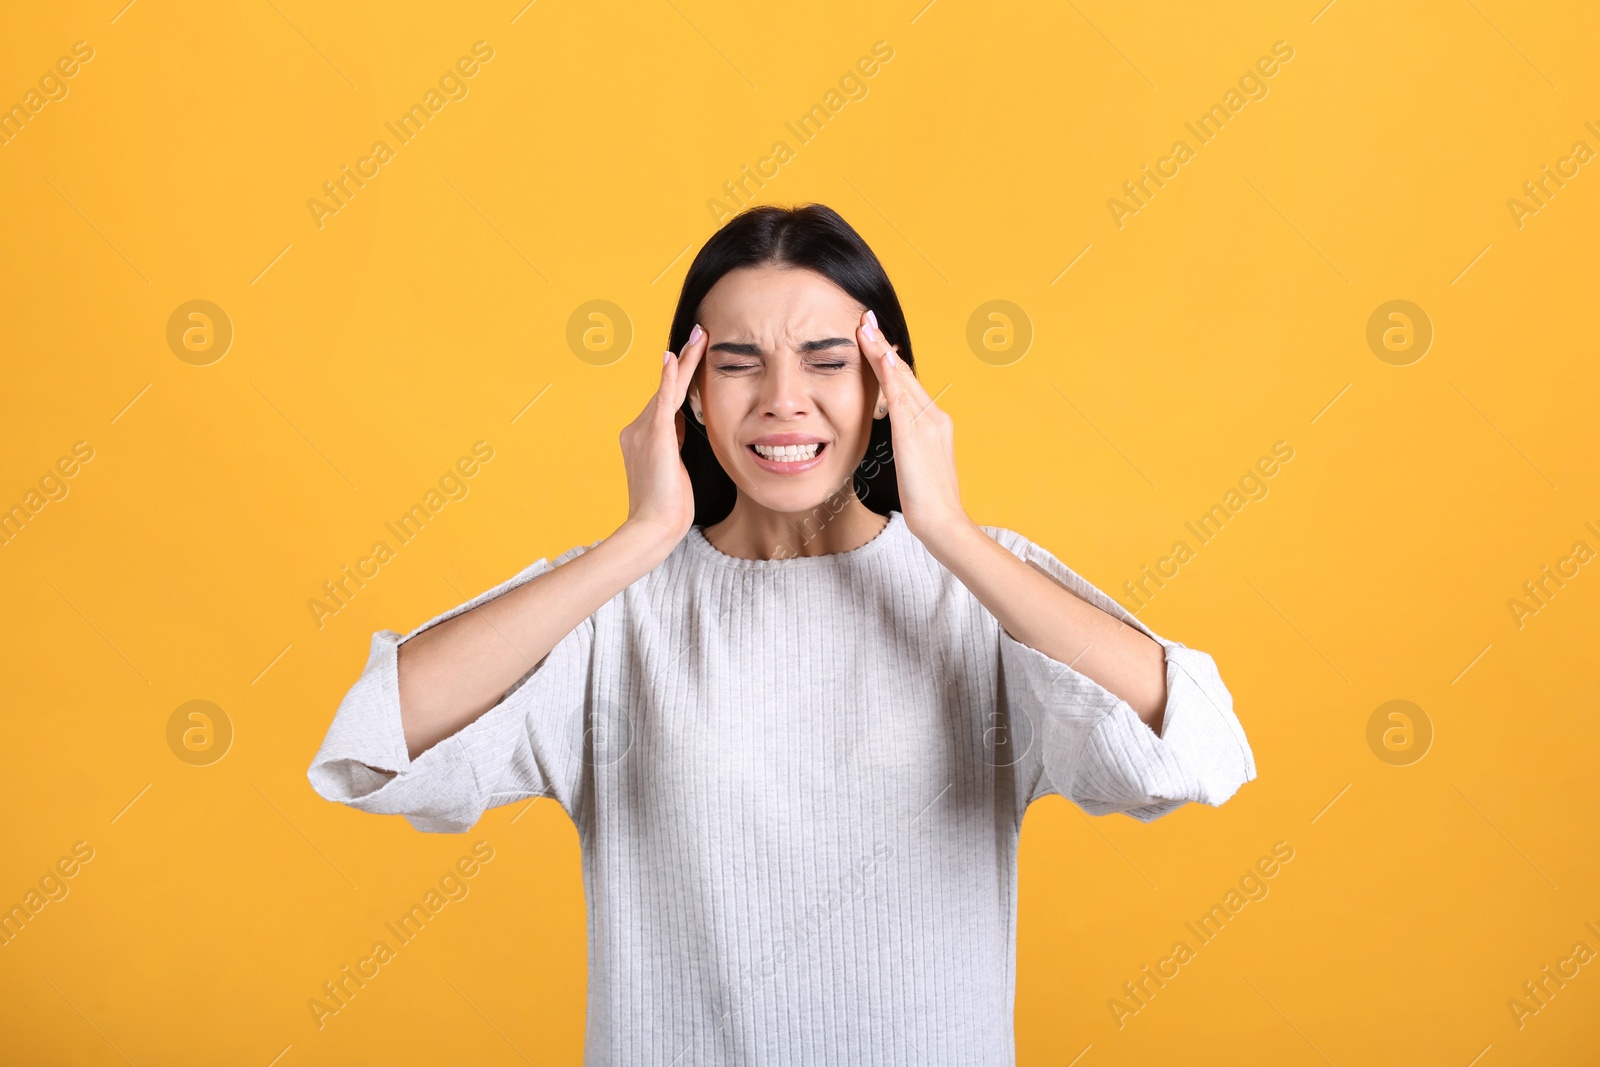 Photo of Portrait of stressed young woman on yellow background